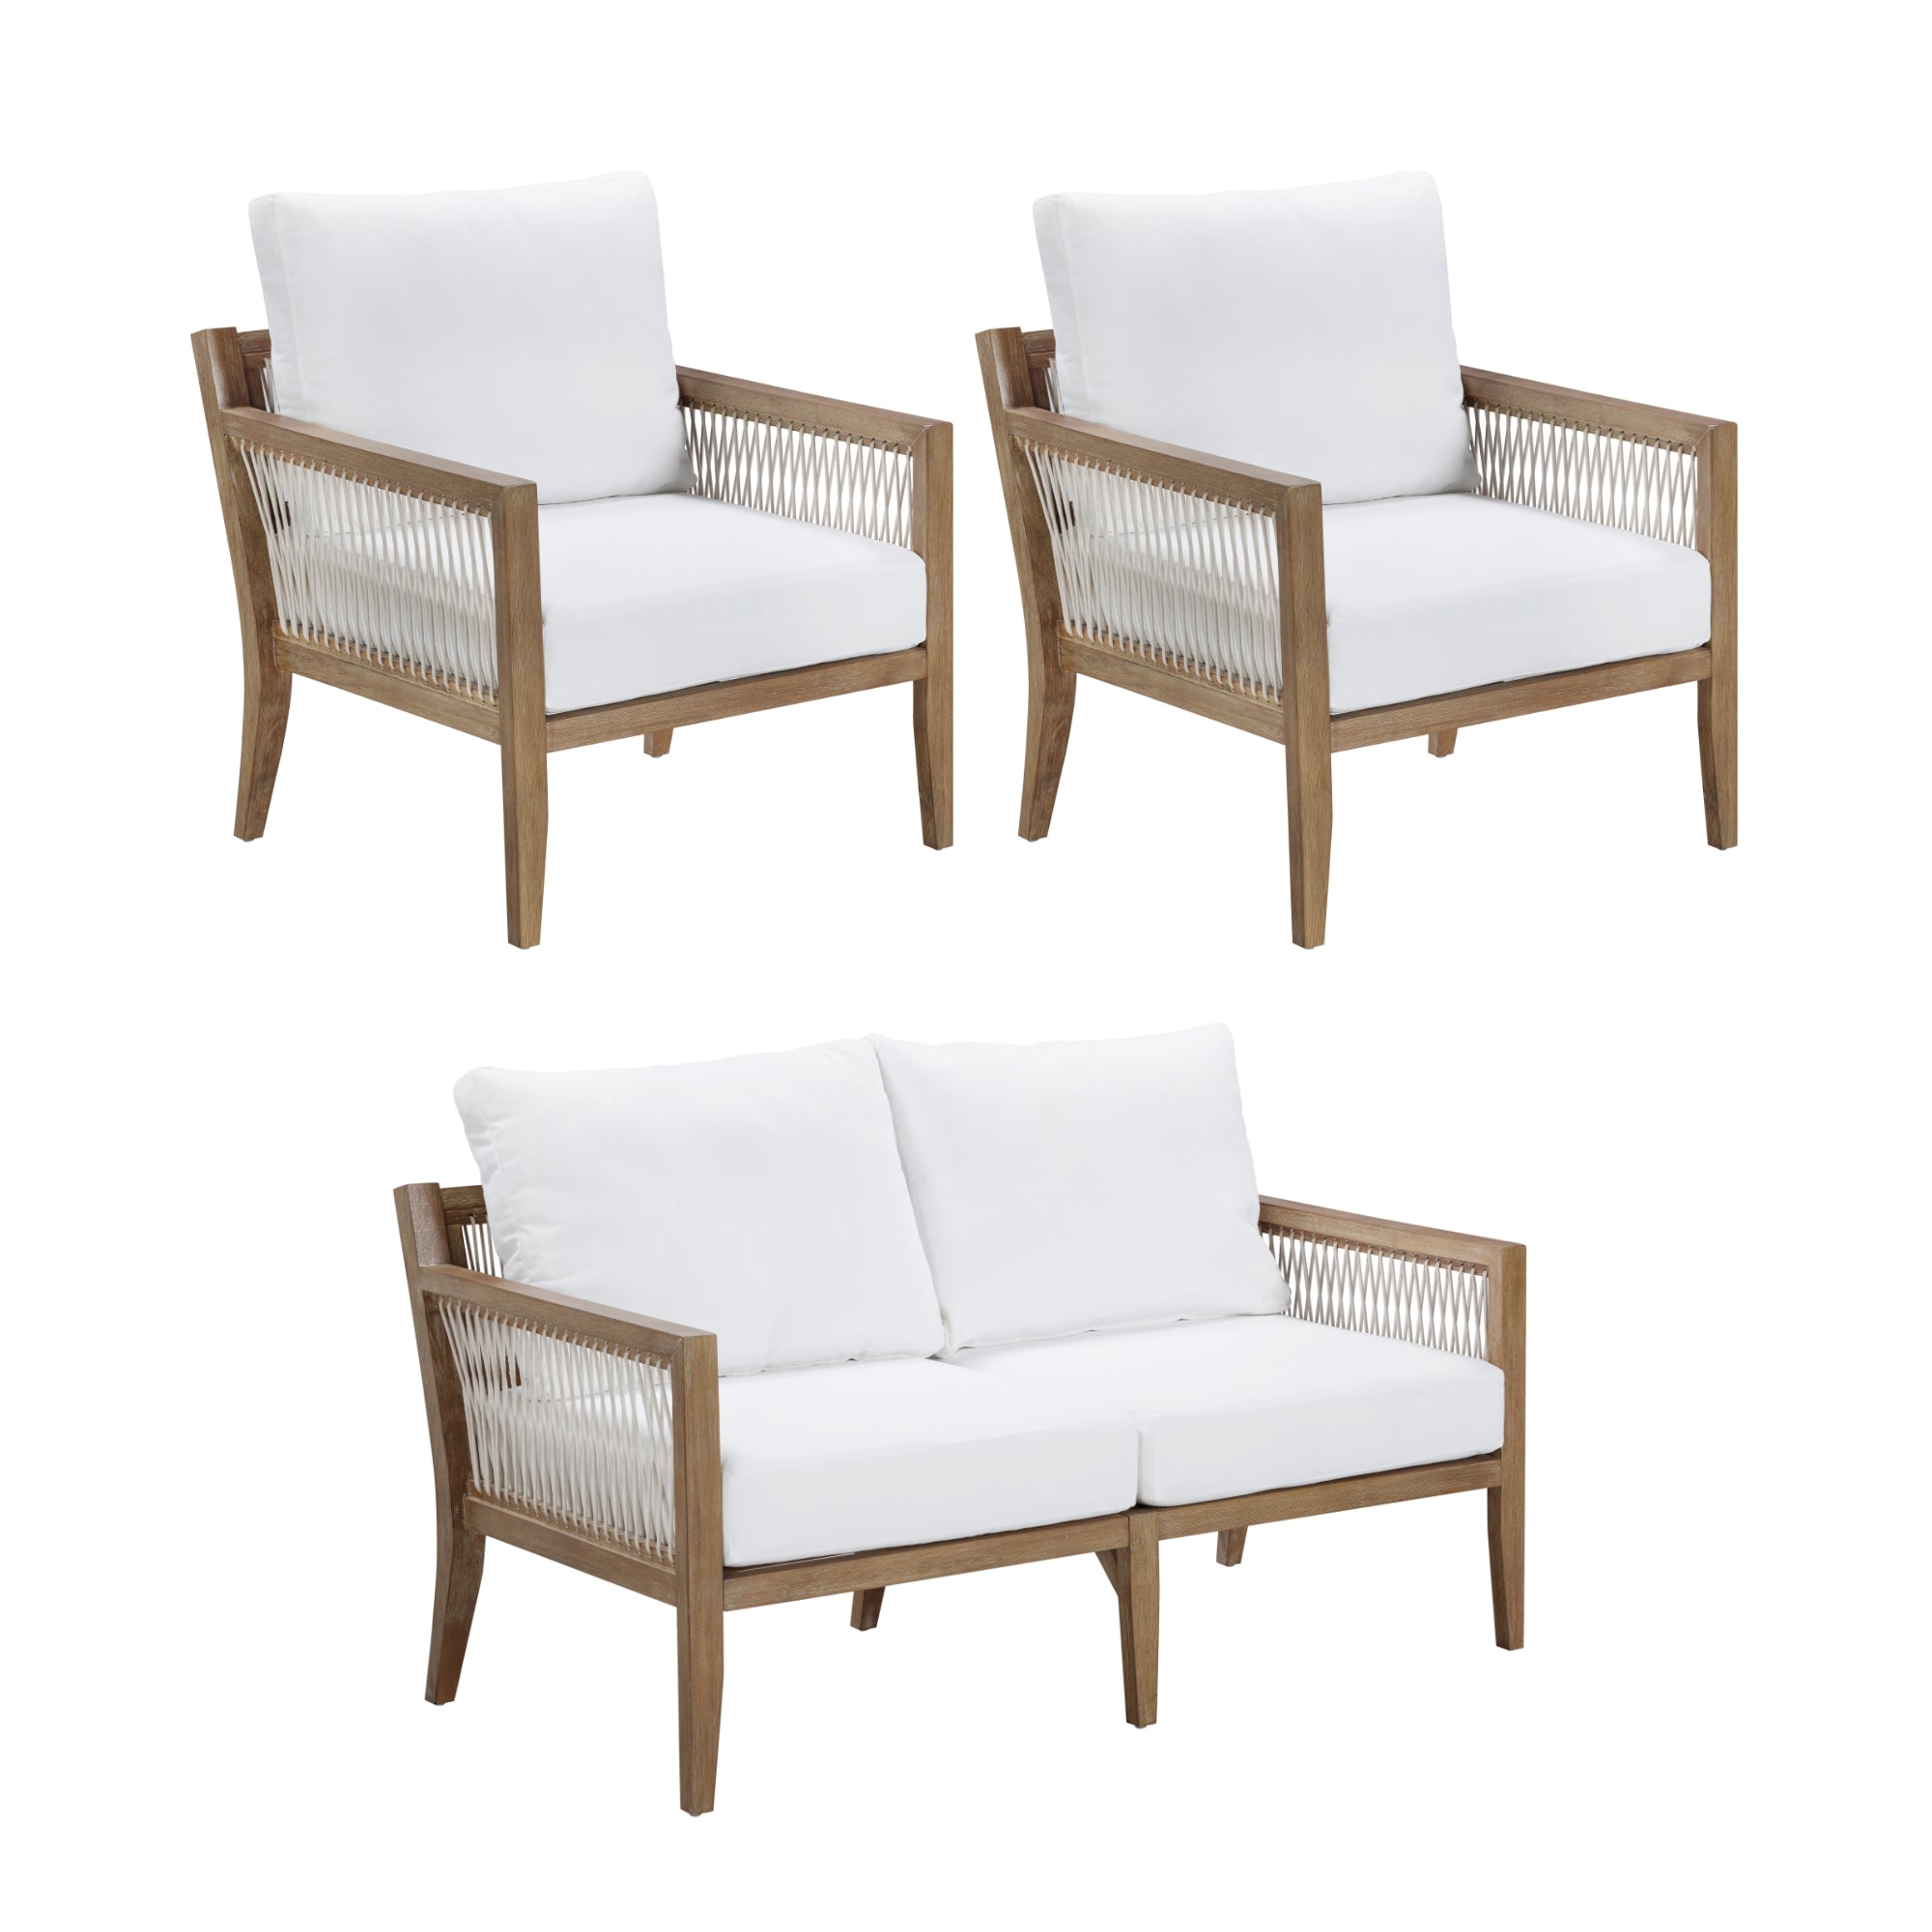 Outdoor Set Patio Loveseat & 2 Chairs White